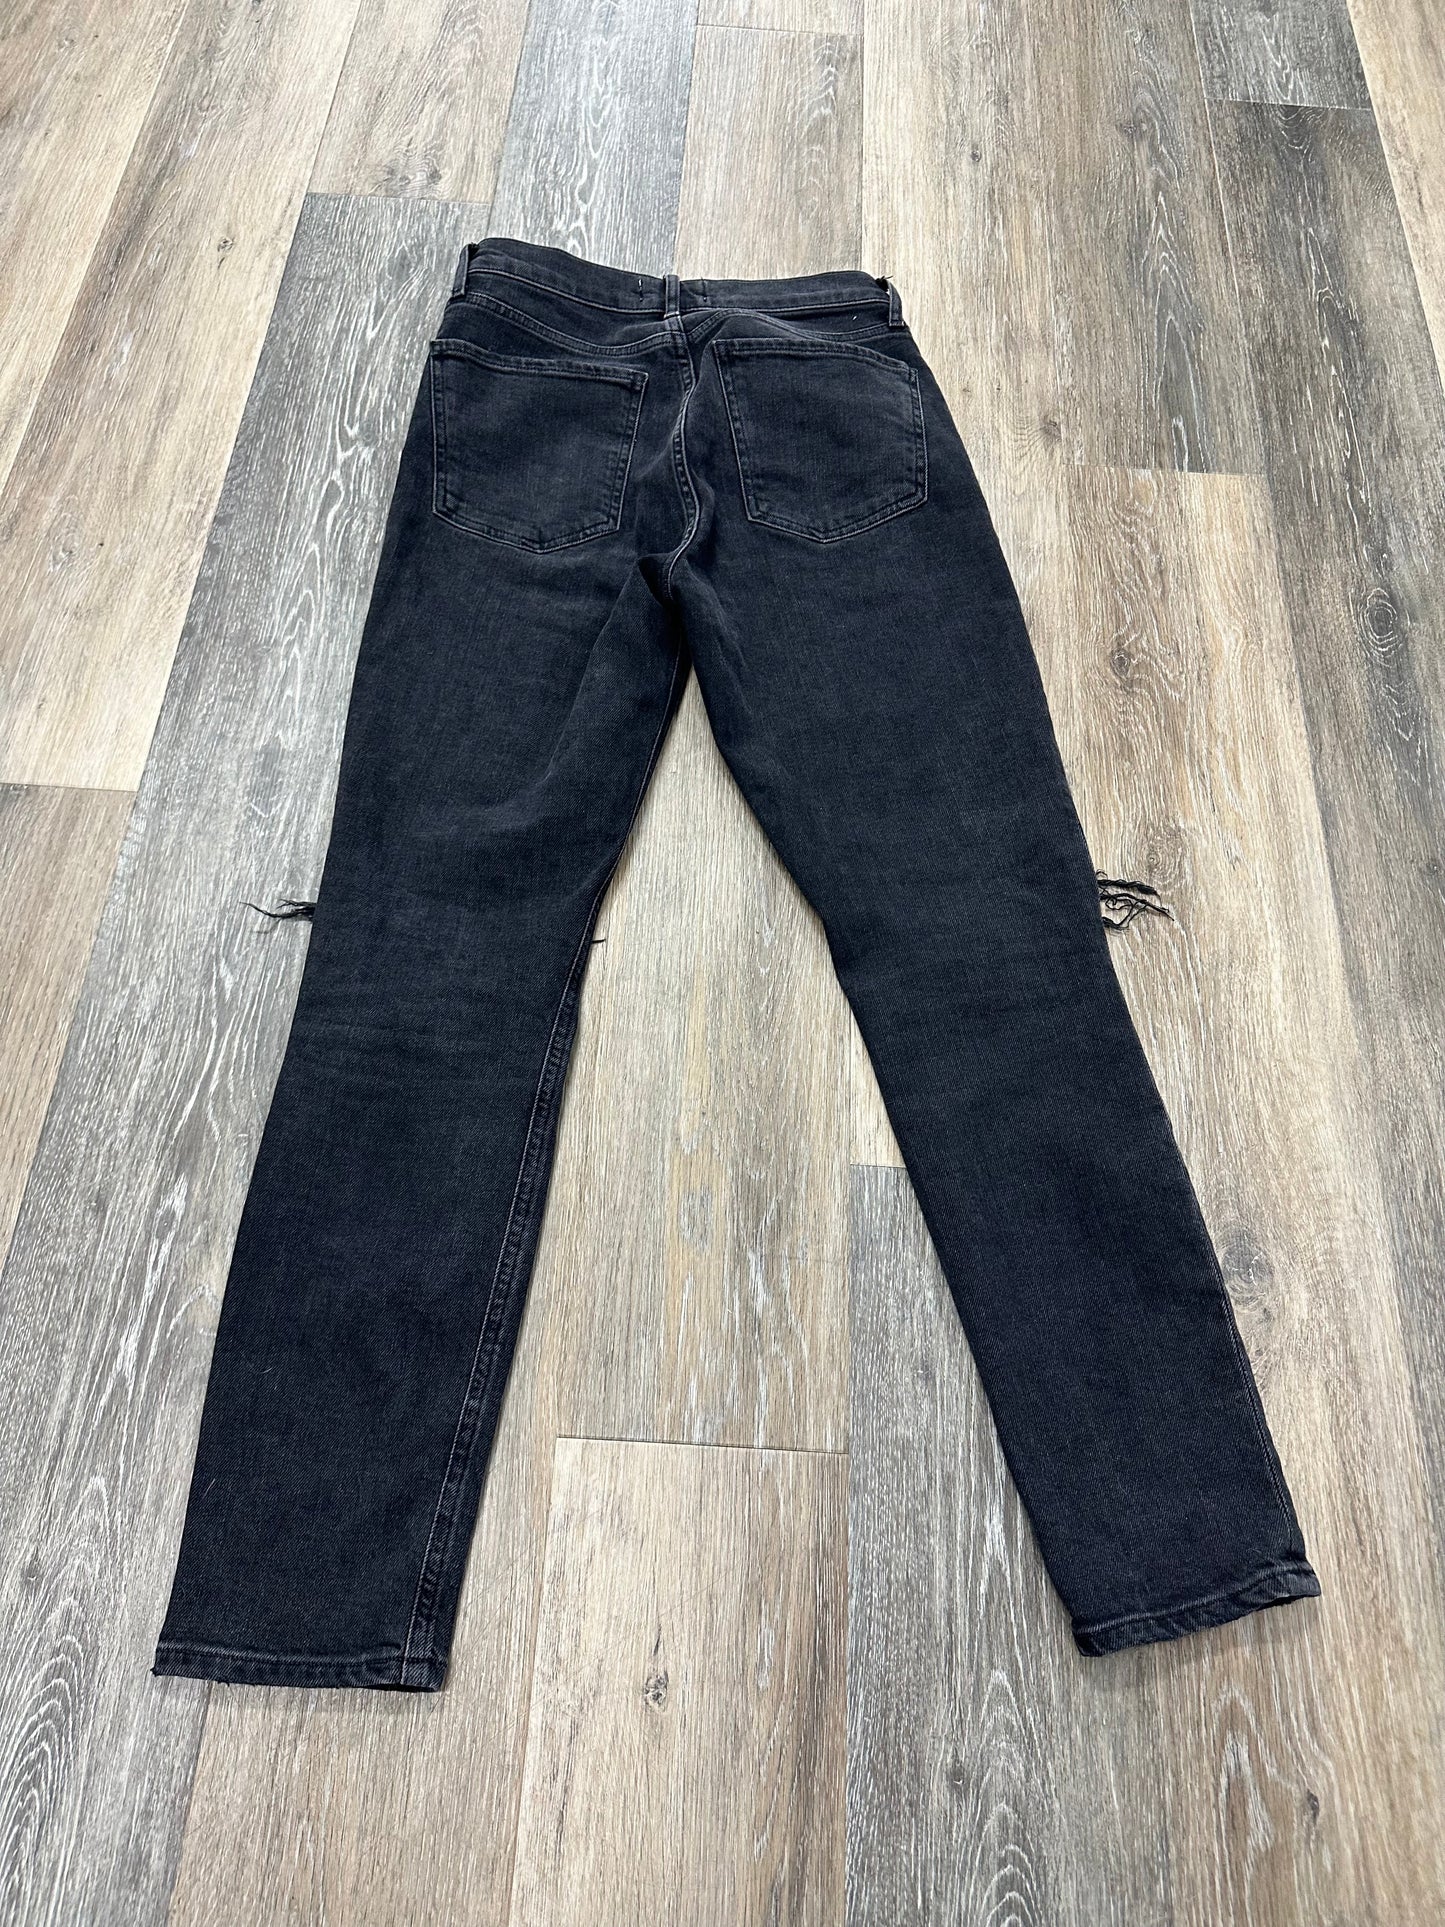 Jeans Skinny By Agolde  Size: 1